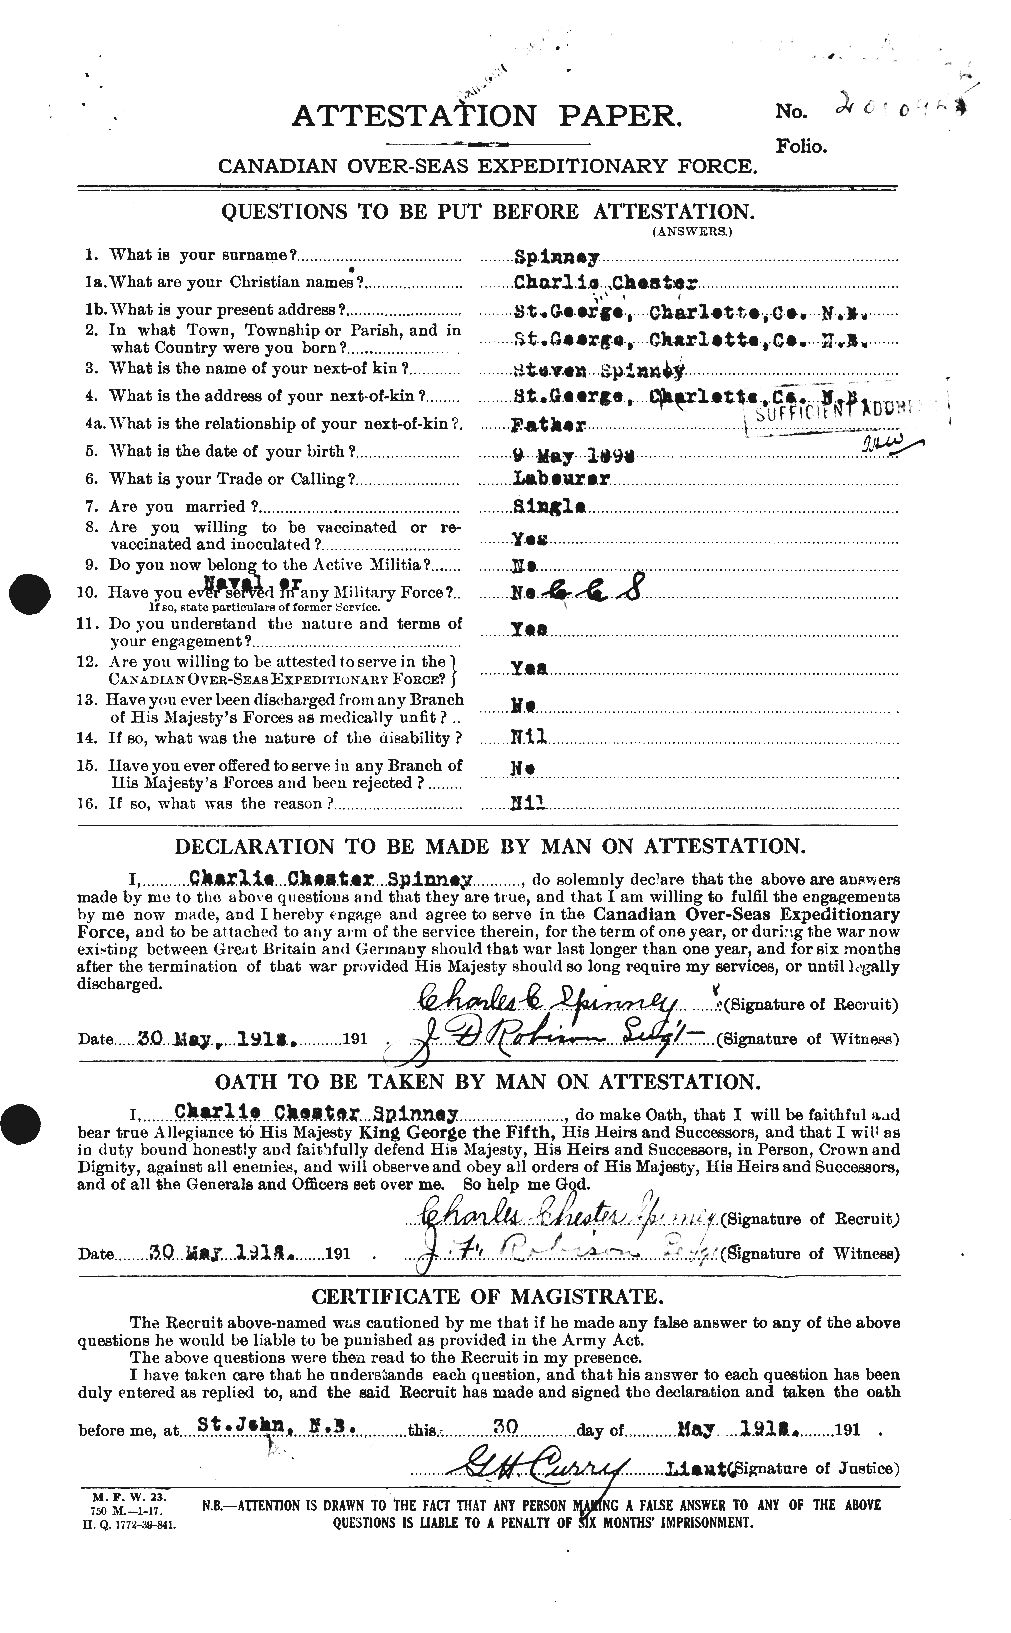 Personnel Records of the First World War - CEF 114426a